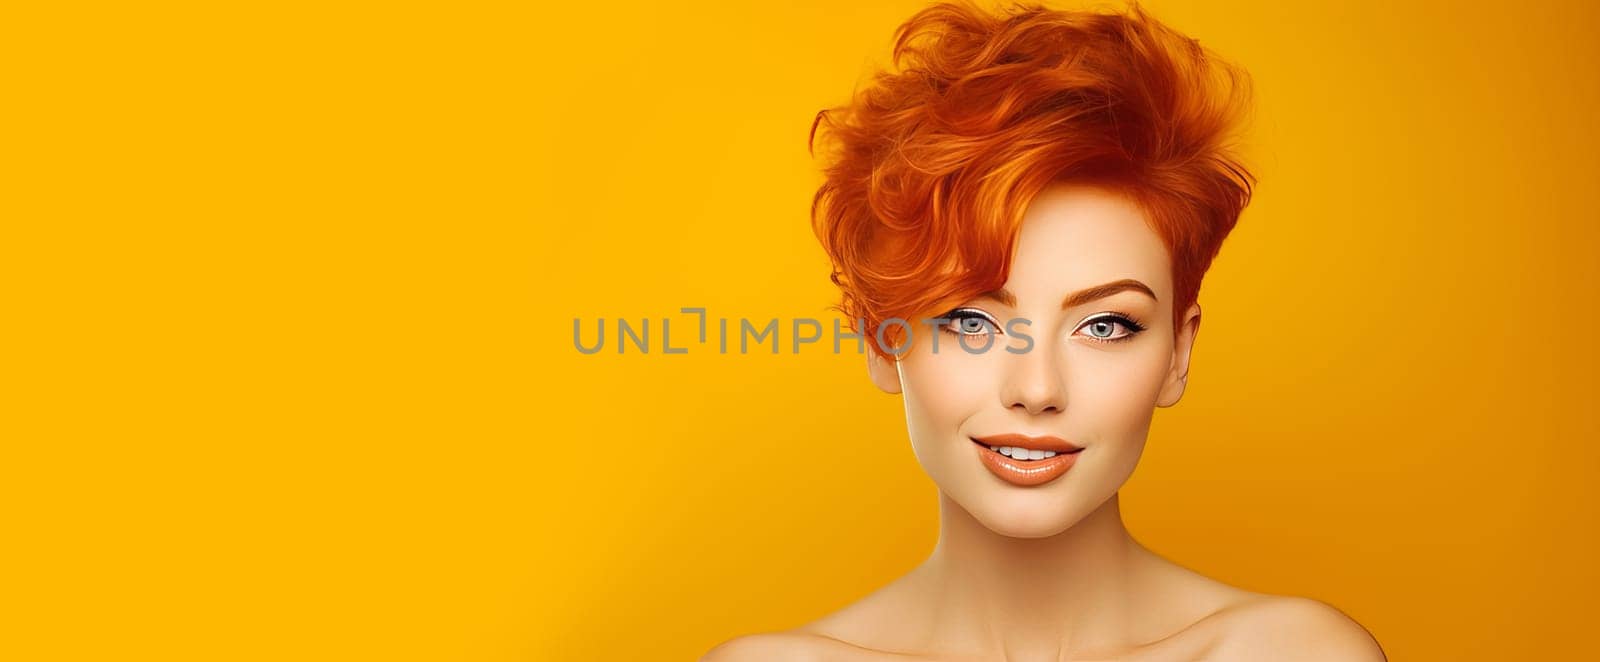 Portrait of an elegant, sexy smiling woman with perfect skin and short red hair, on a yellow background, banner. Advertising of cosmetic products, spa treatments, shampoos and hair care, dentistry and medicine, perfumes and cosmetology for women.